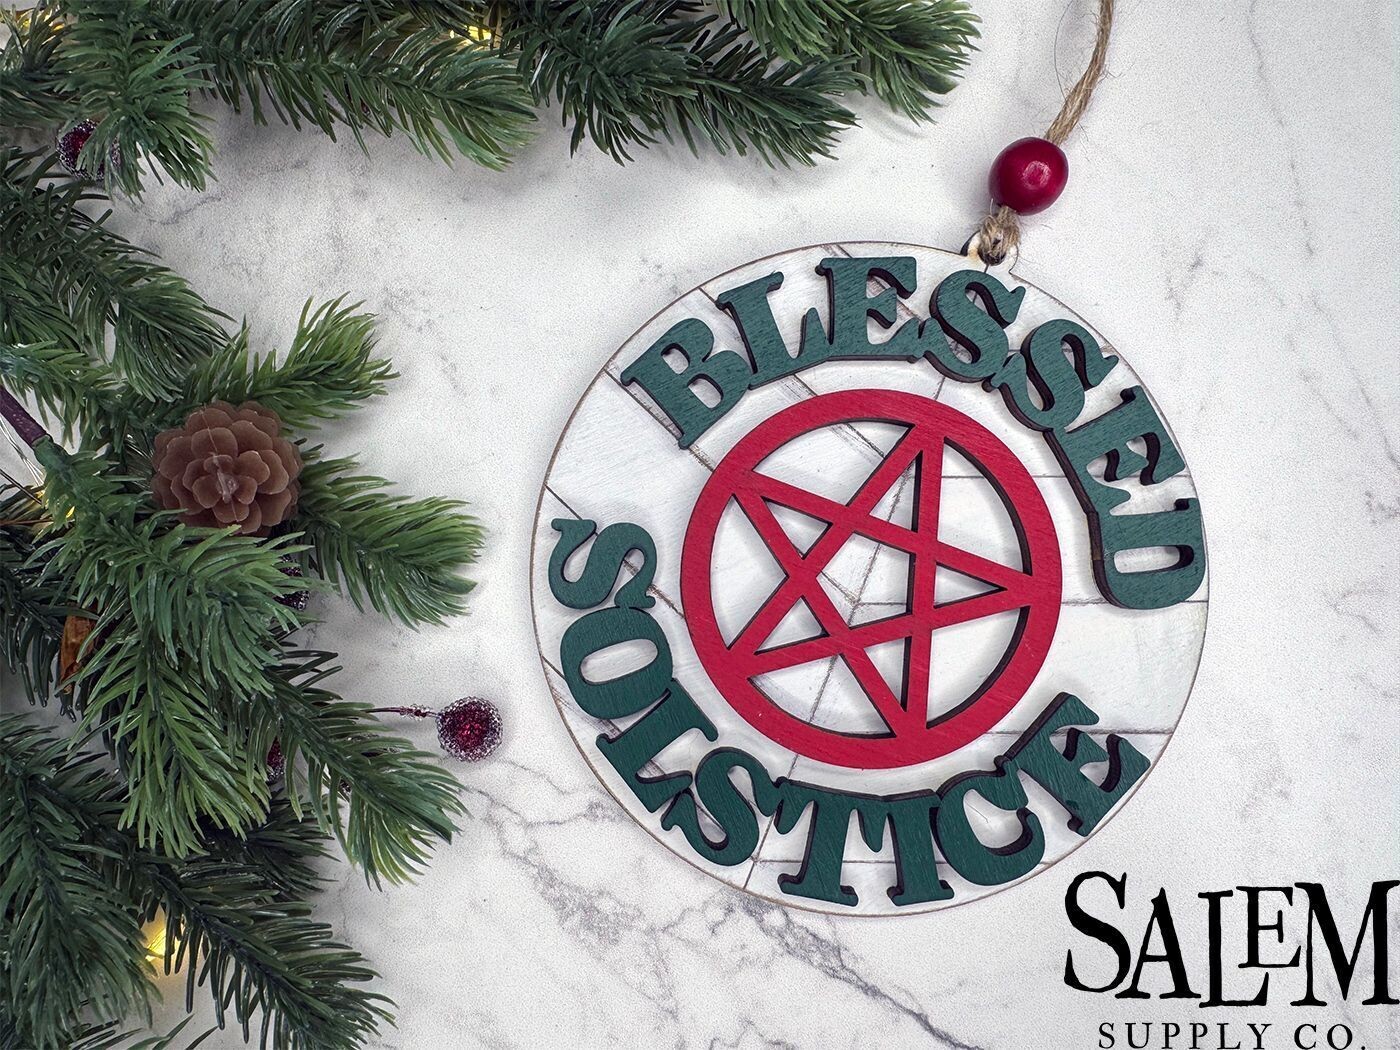 "Blessed Solstice" Pentacle Farmhouse Style Wood Christmas Ornament